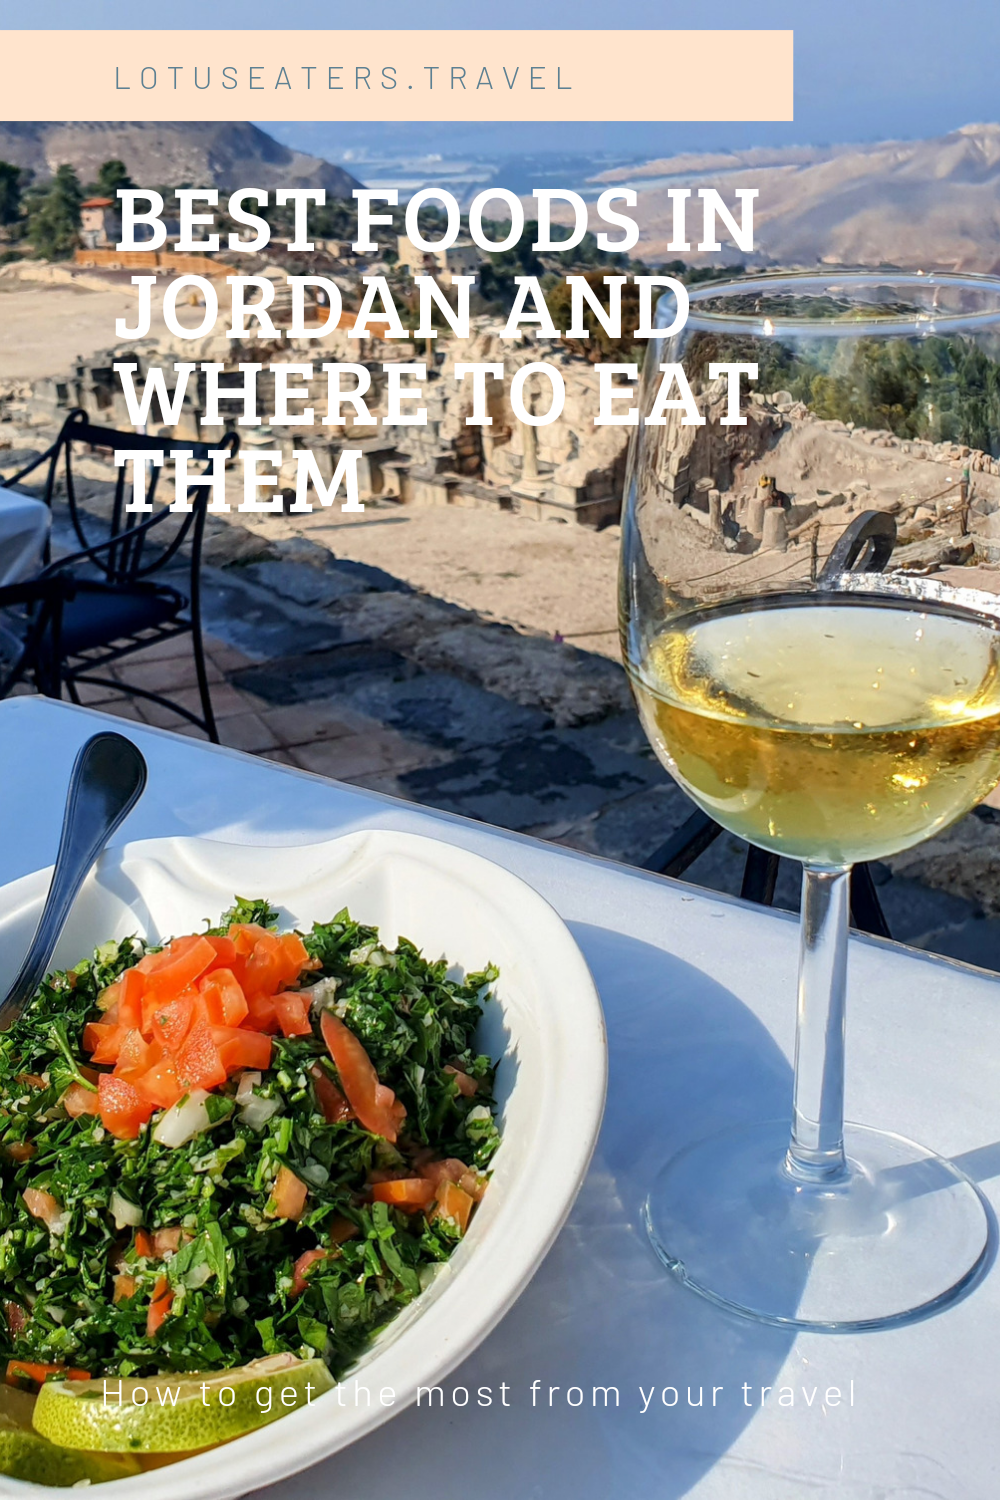 Best foods in Jordan and where to eat them